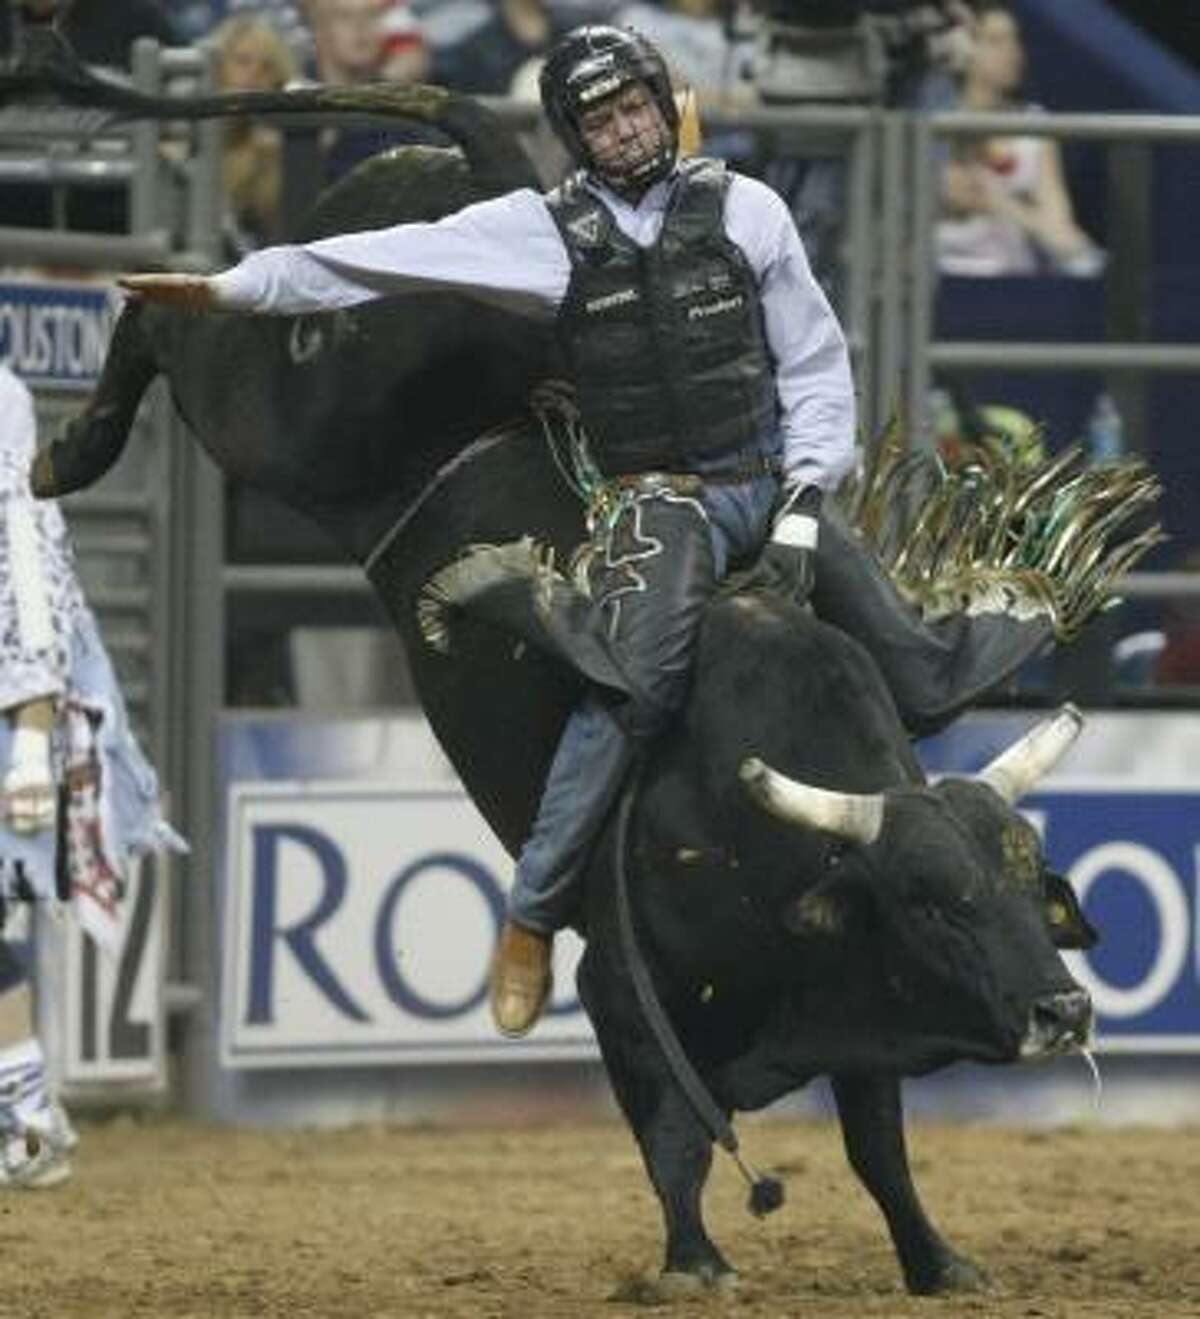 B.J. Schumacher holds on to win the bull riding competition on the final day of RodeoHouston.